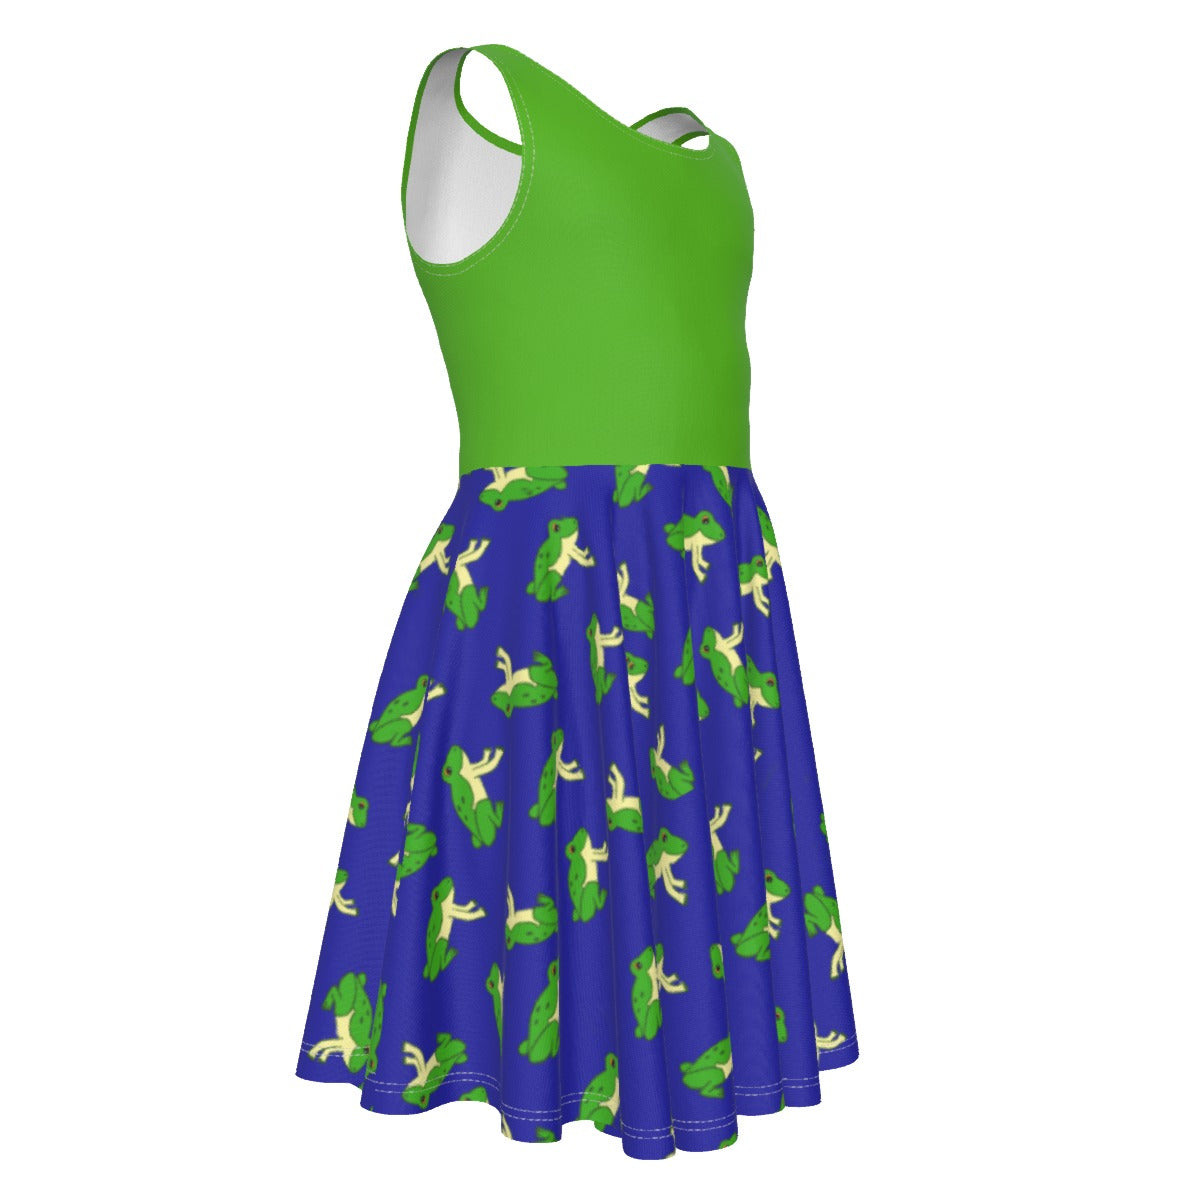 Girls Frog Dress with Green Top